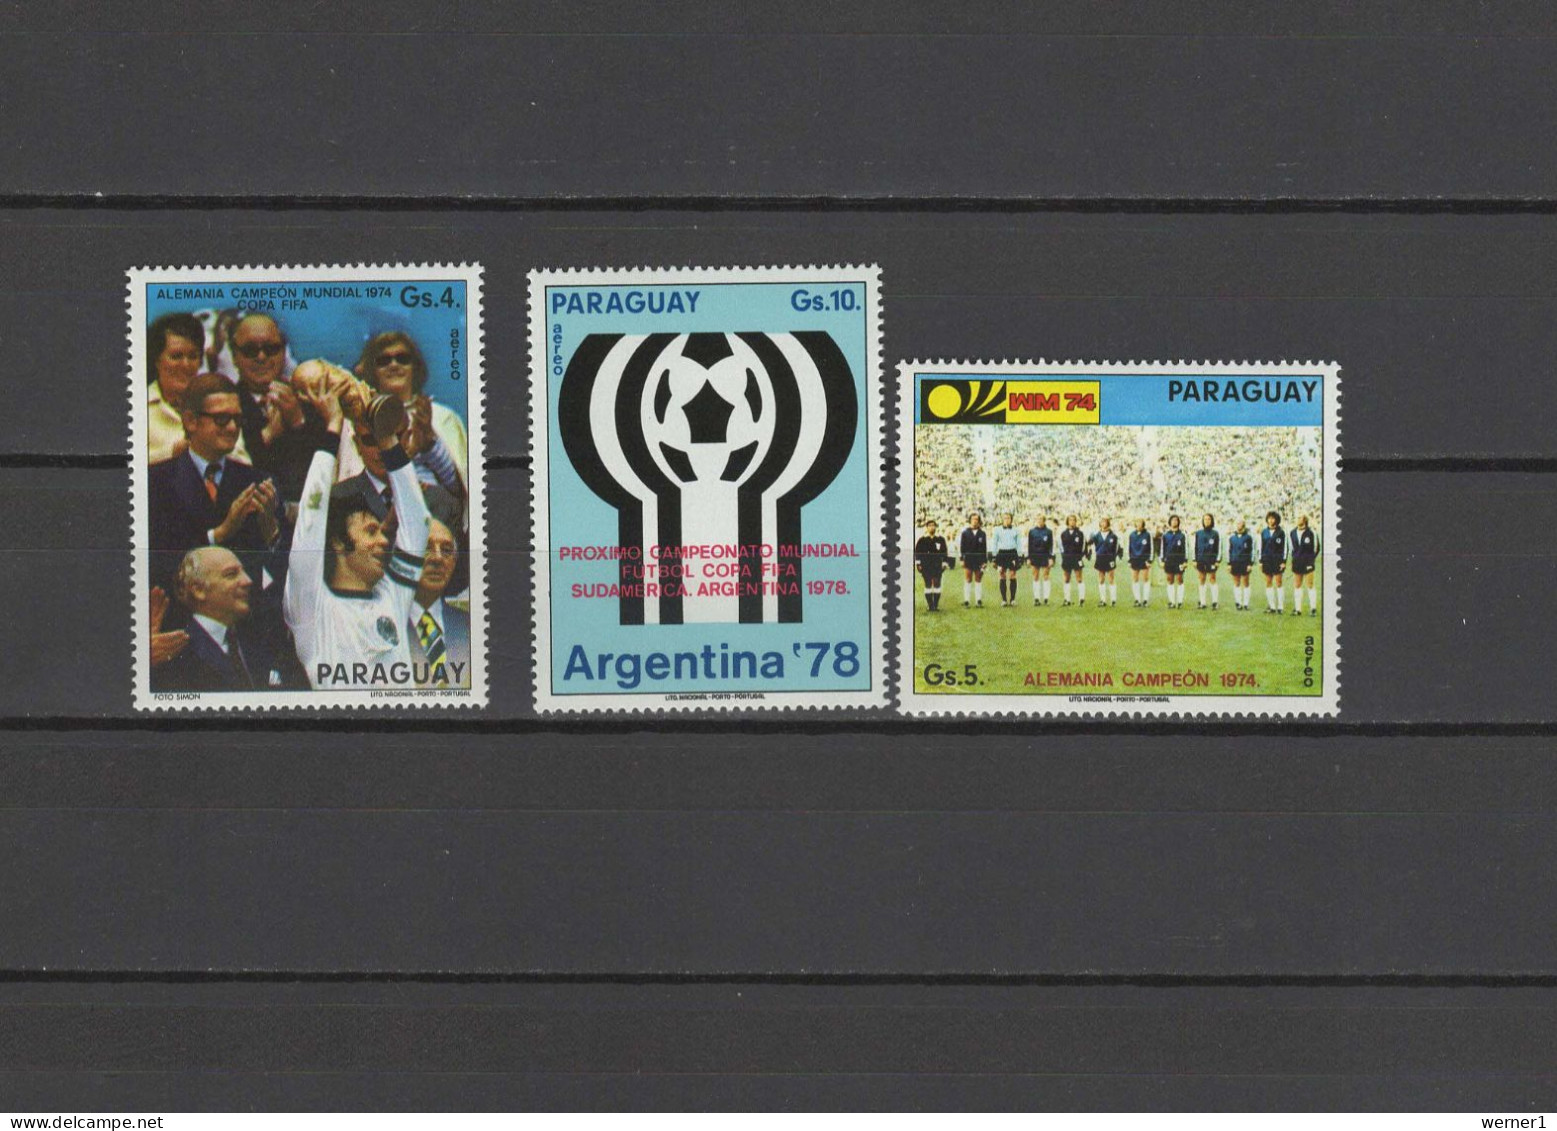 Paraguay 1974 Football Soccer World Cup Set Of 3 MNH - 1974 – Germania Ovest